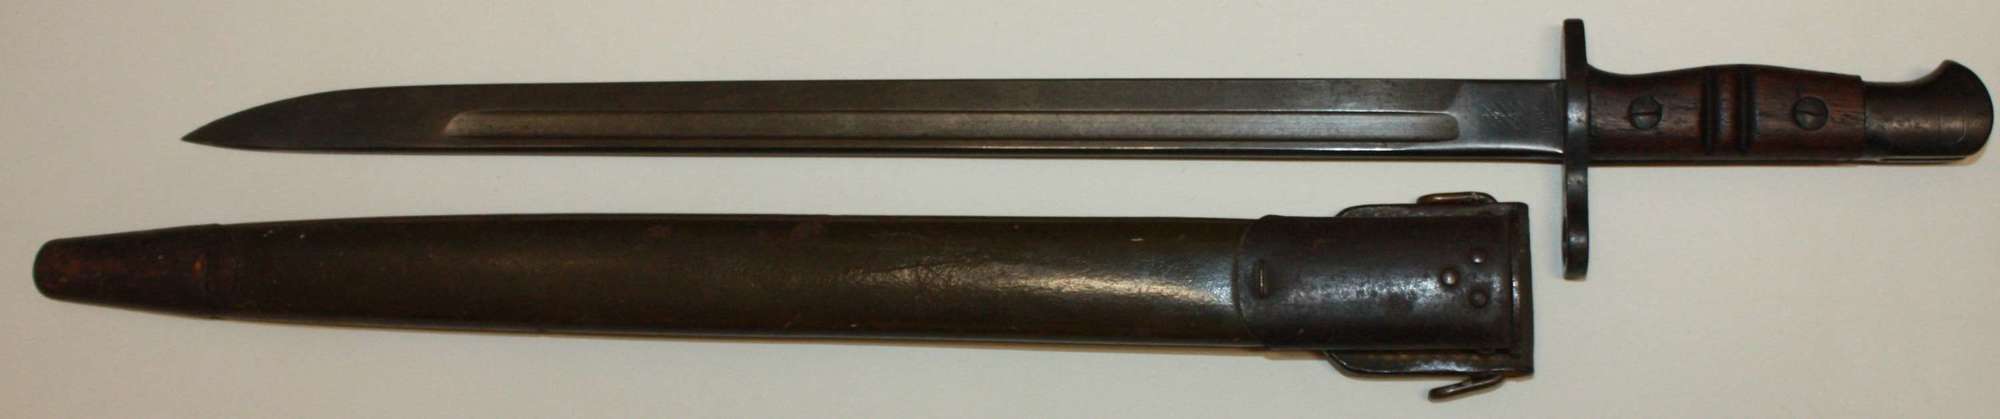 A VERY GOOD CLEAN US P13/17 BAYONET AND SCABBARD